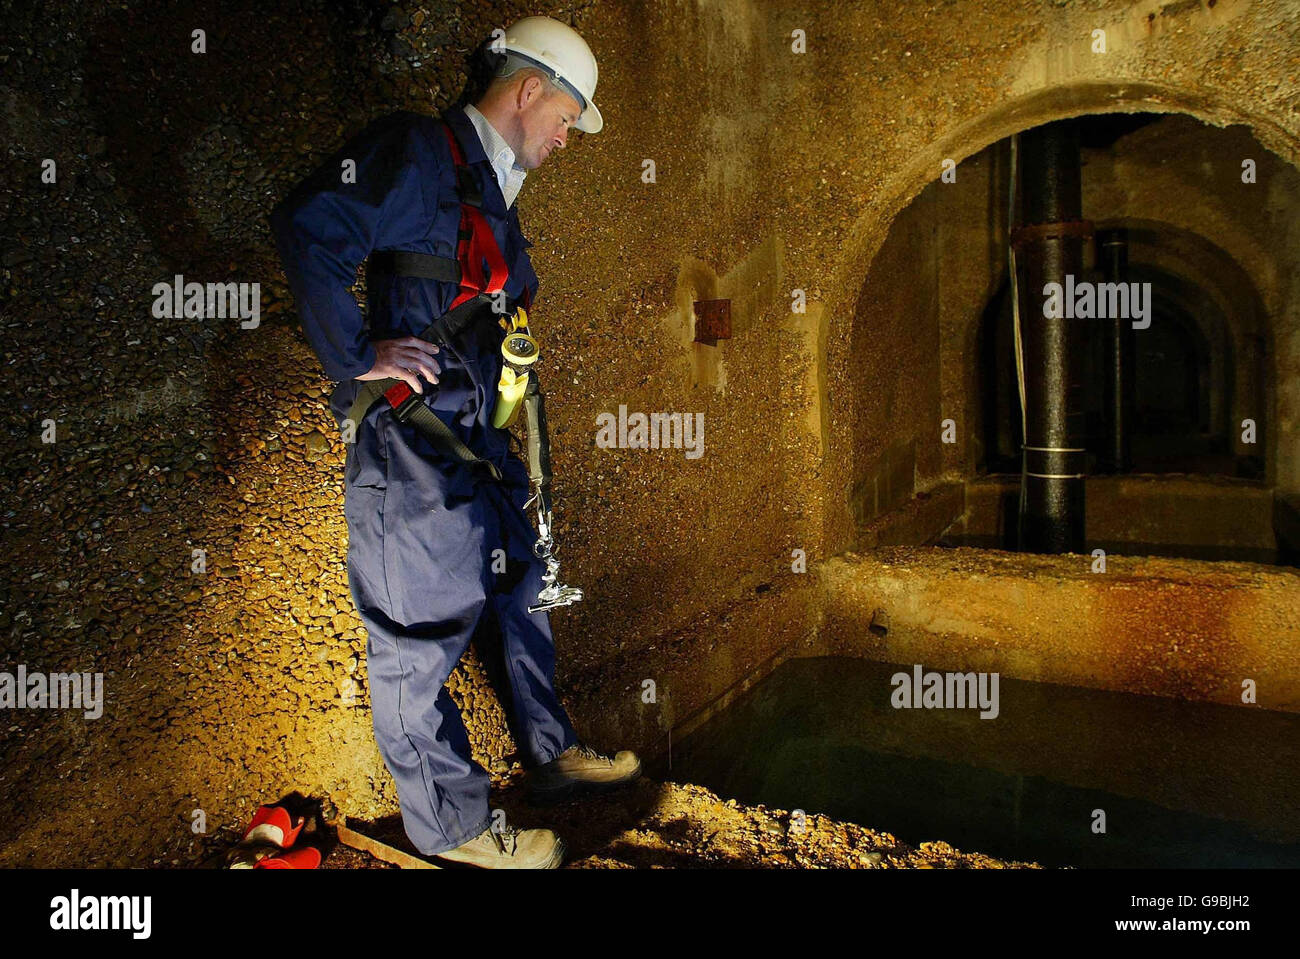 Regional production manager at South East Water, Kevin Clark, looks into the water at the bottom of a borehole near Eastbourne, Sussex, in a chamber which should be submerged at this time of year. Stock Photo